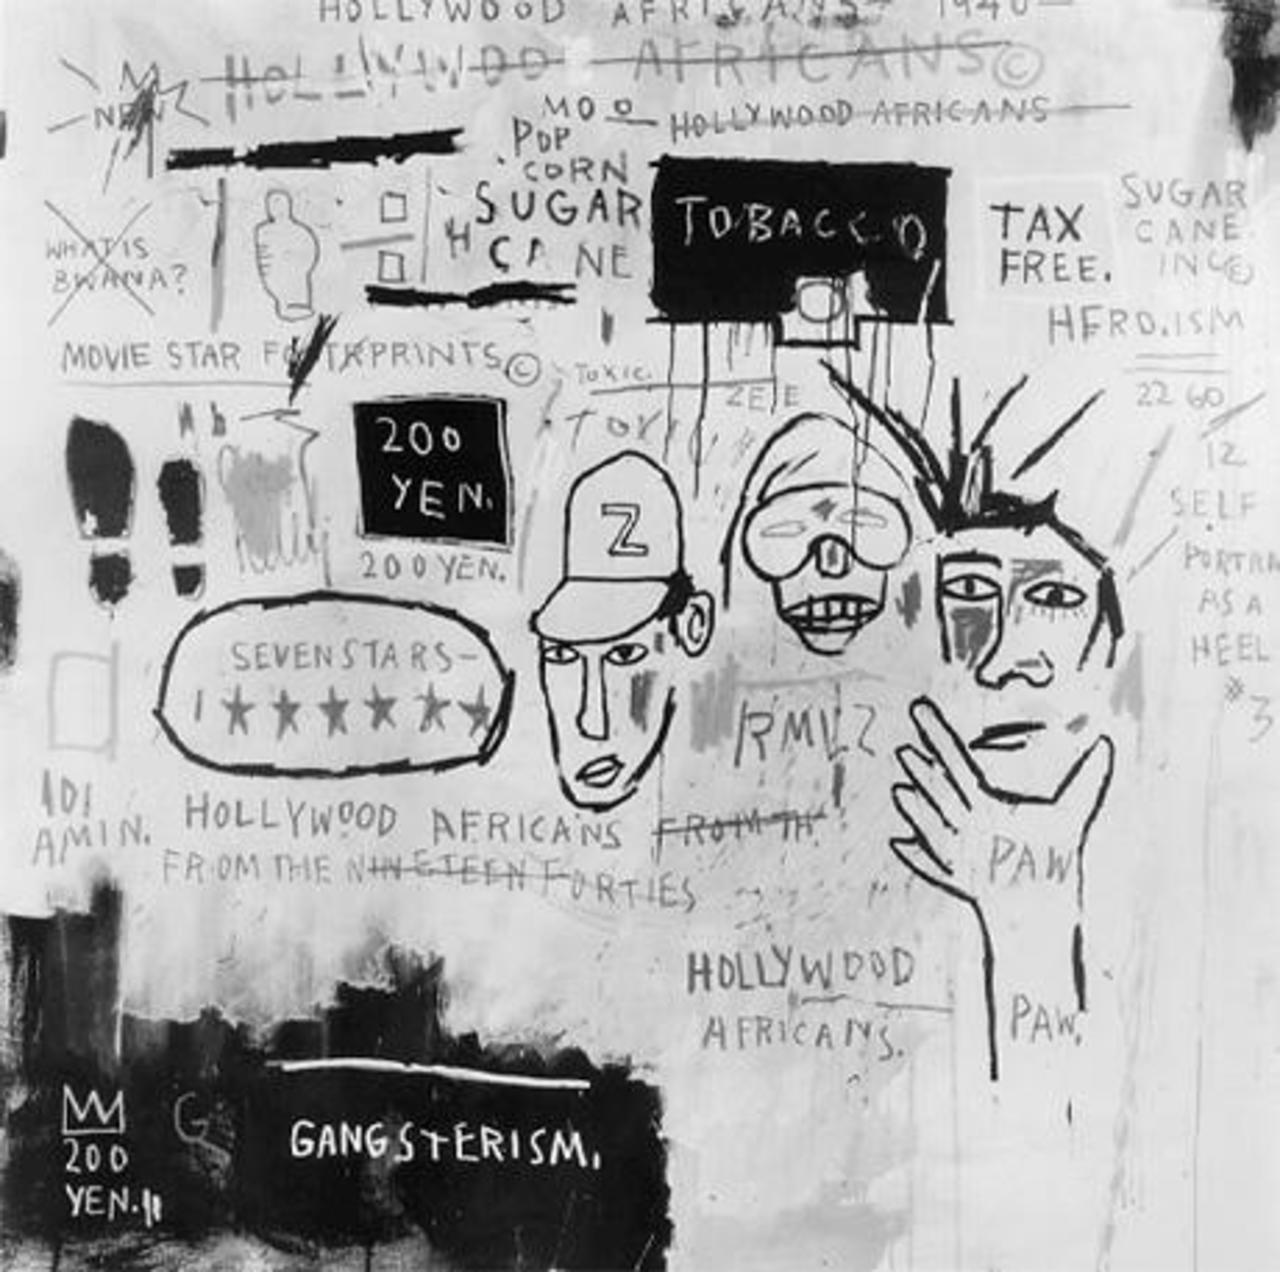 #Hollywood #Africans Jean Michel #Basquiat 
from #show @ #Whitney #Museum of #American #art in #Stanford
#graffiti http://t.co/XDbsRThX2R